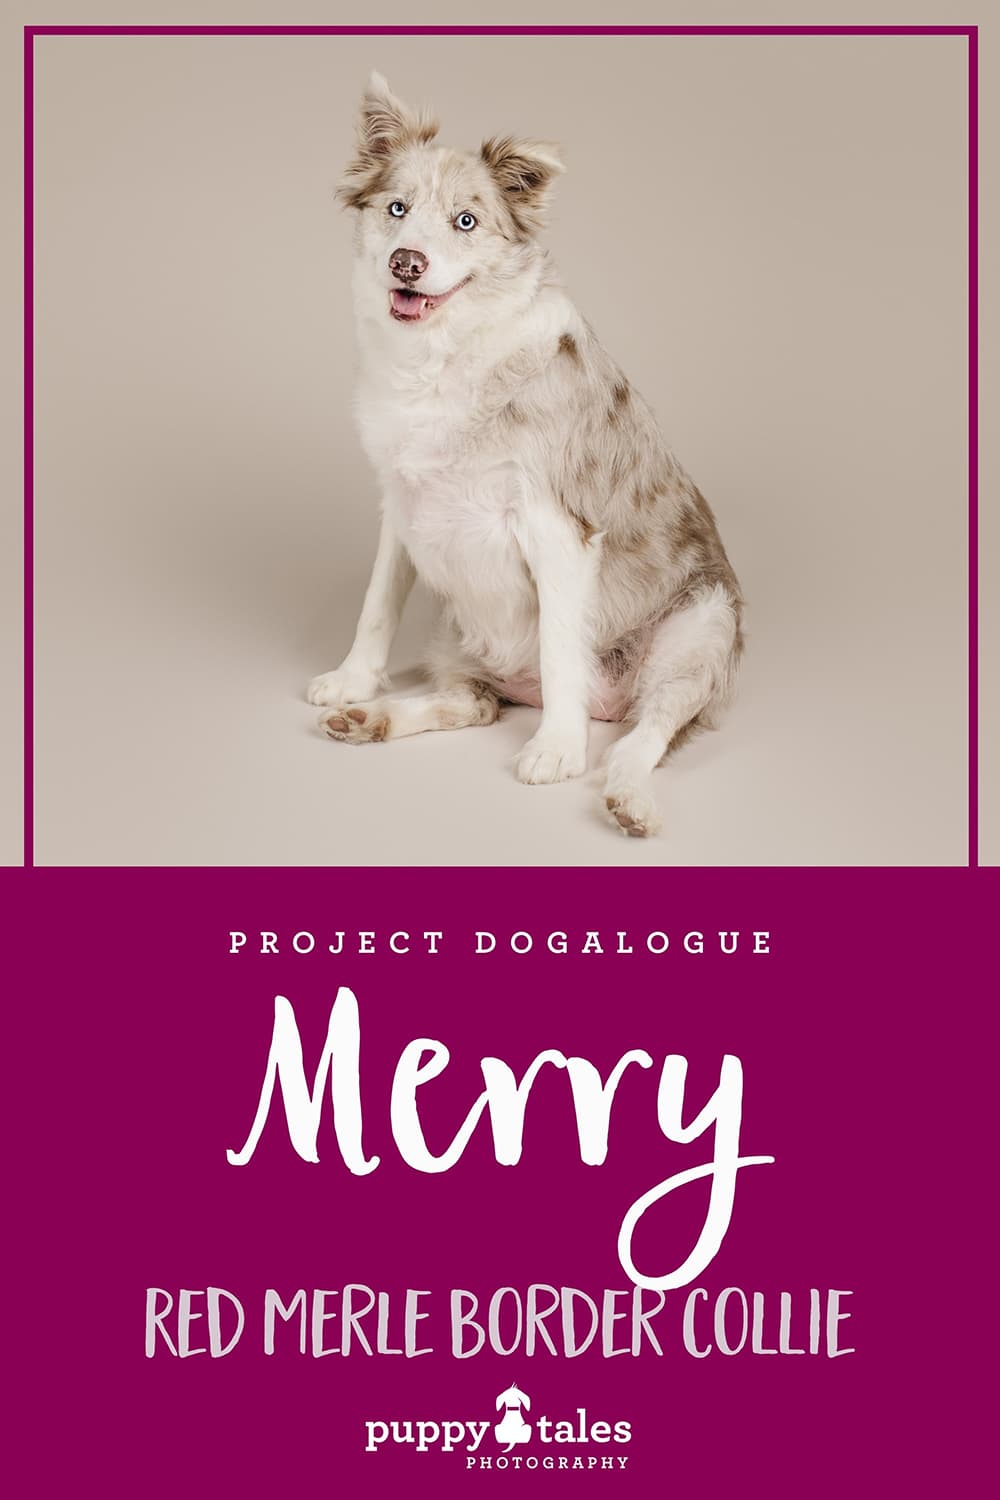 Merry, the Red Merle Border Collie, was photographed by Kerry Martin of Puppy Tales Photography for Project Dogalogue. Pinterest graphic for her blog article.